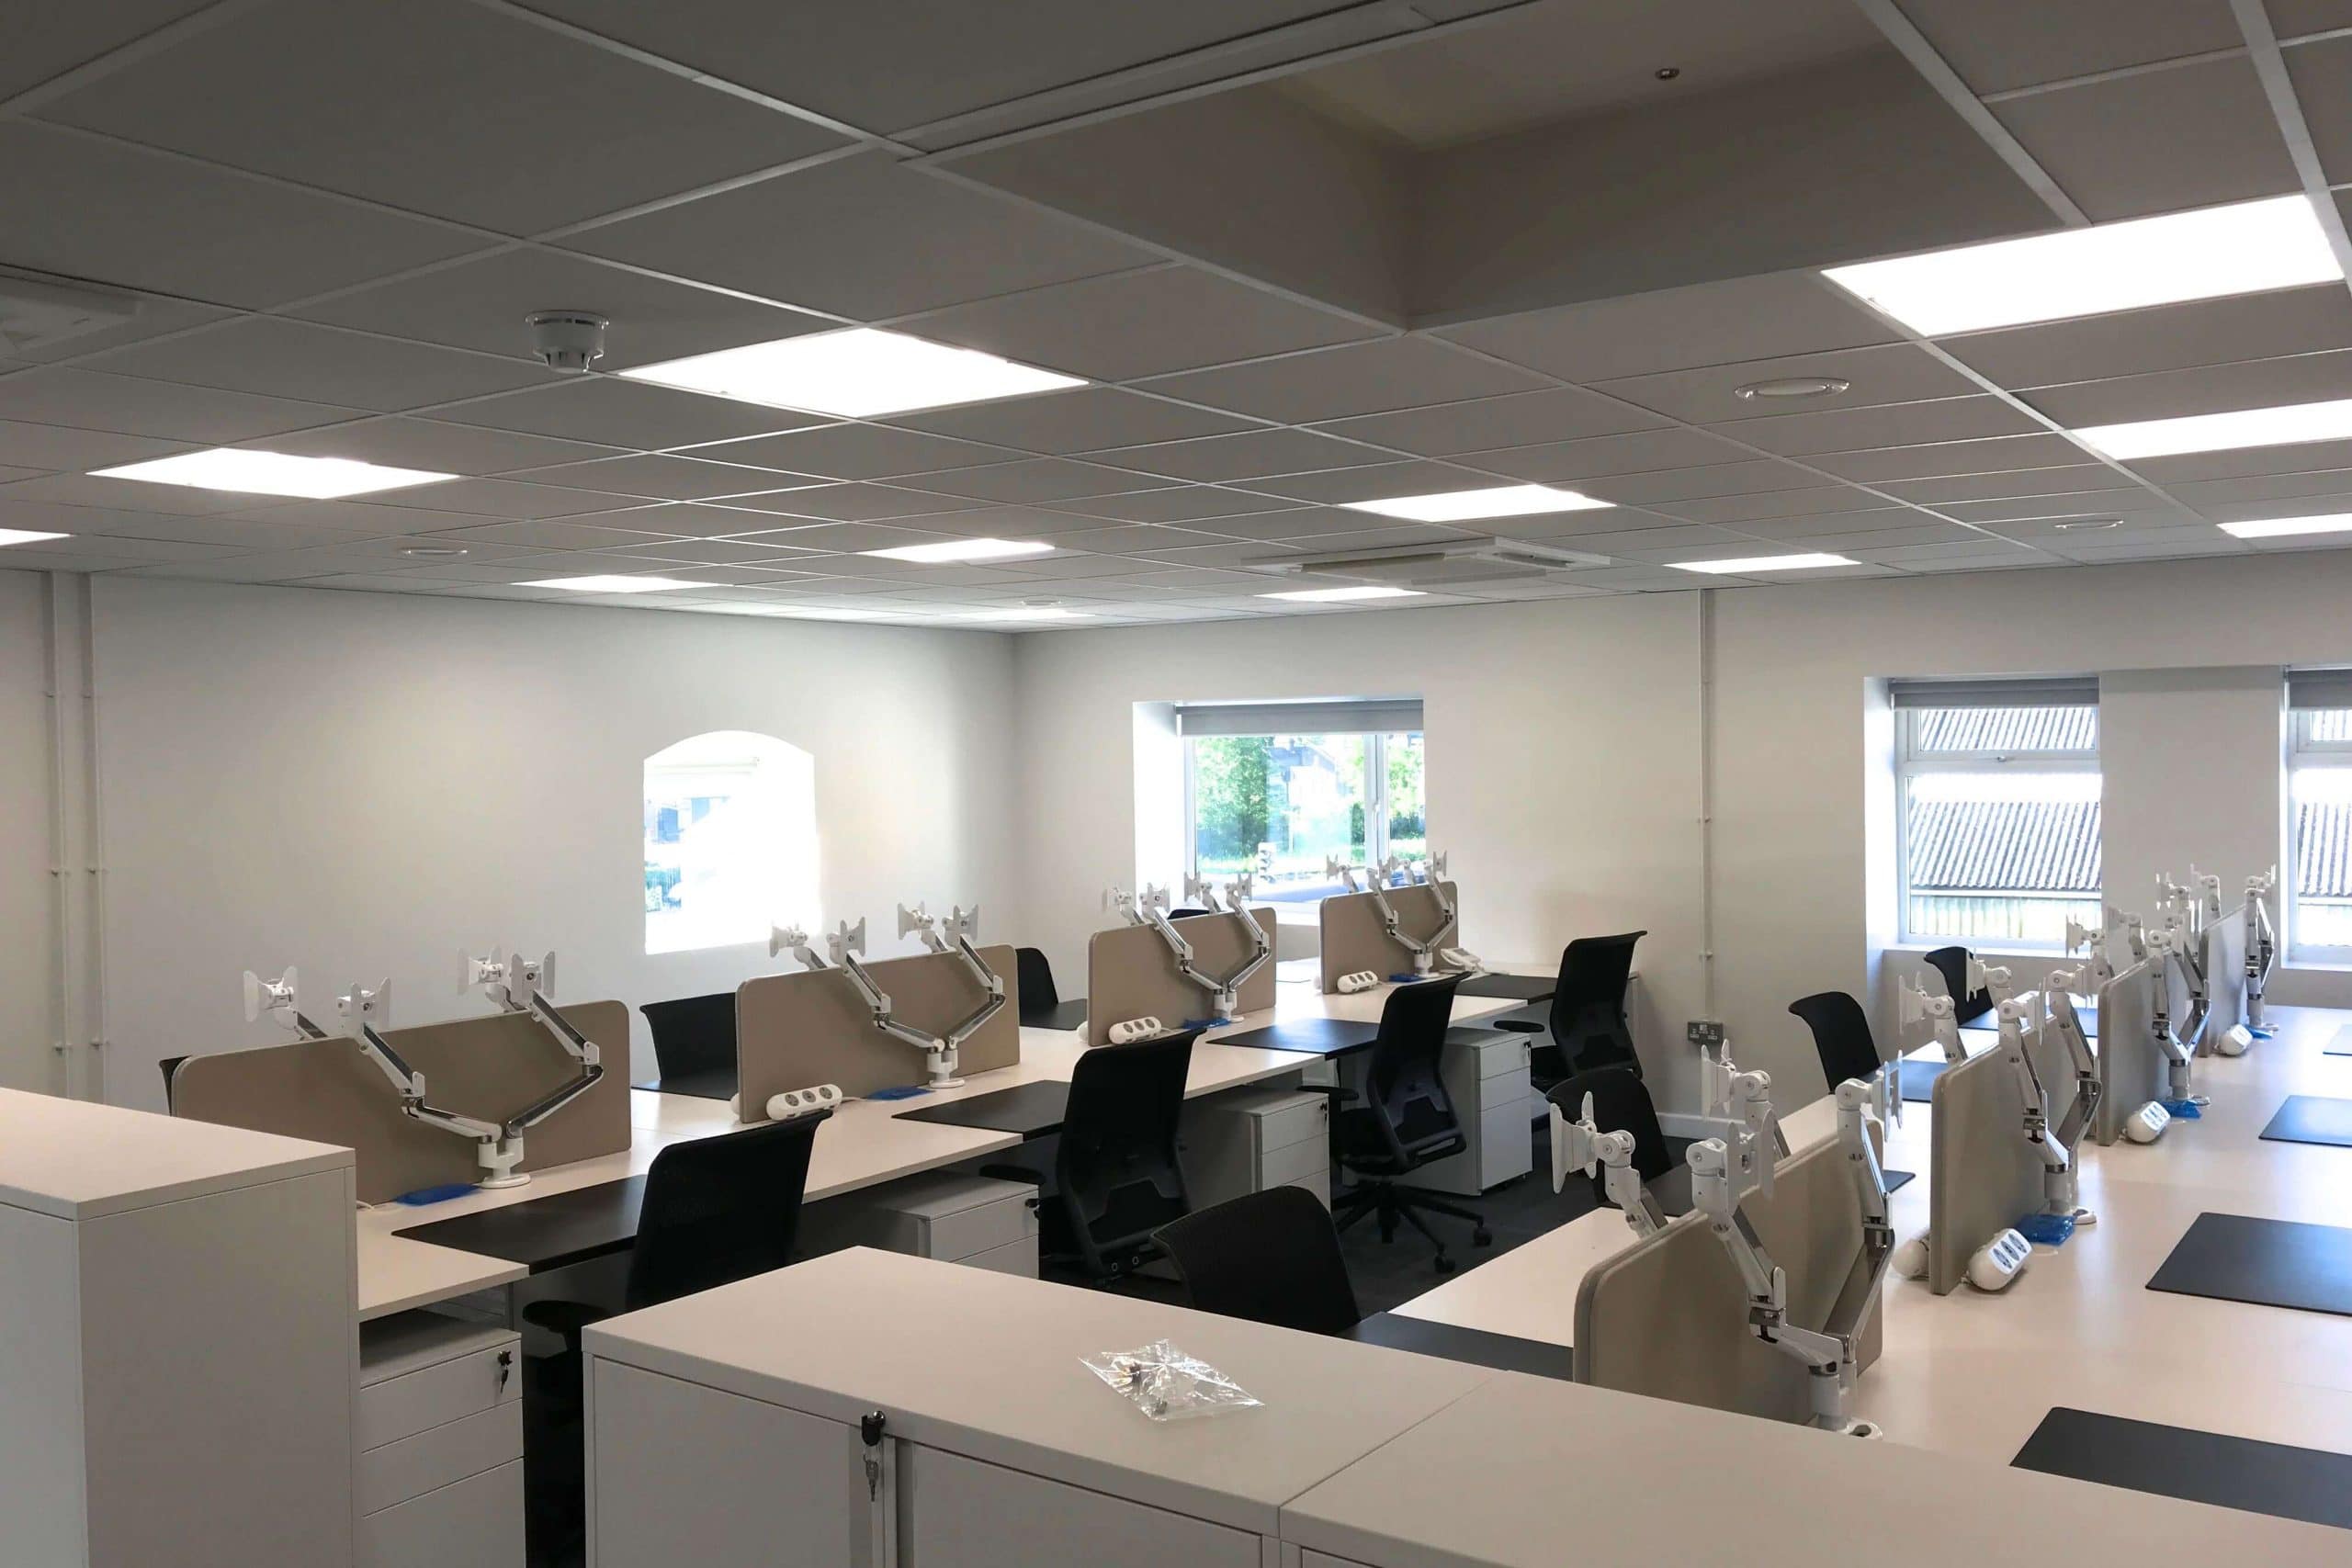 Norwood junction large commercial air conditioning solution by SubCool FM white ceiling cassette in multi-desk office or hot desk area